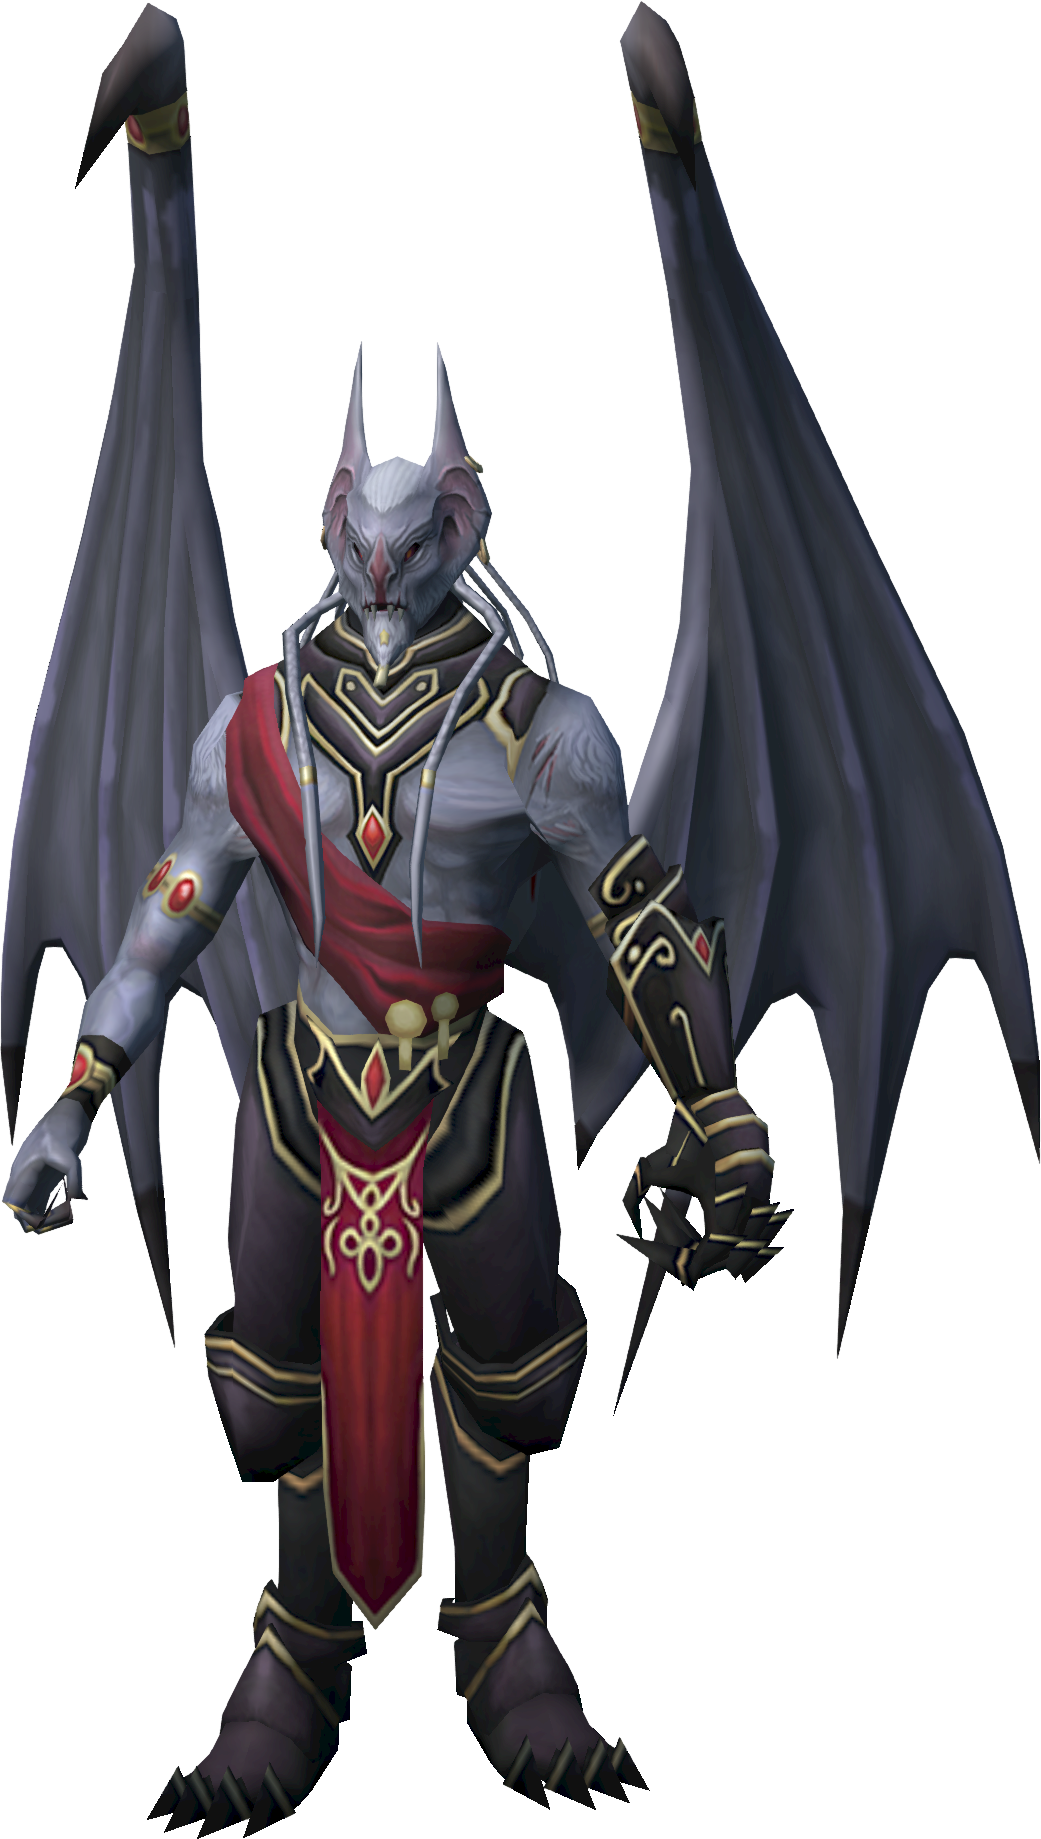 Twilight of the Gods - The RuneScape Wiki